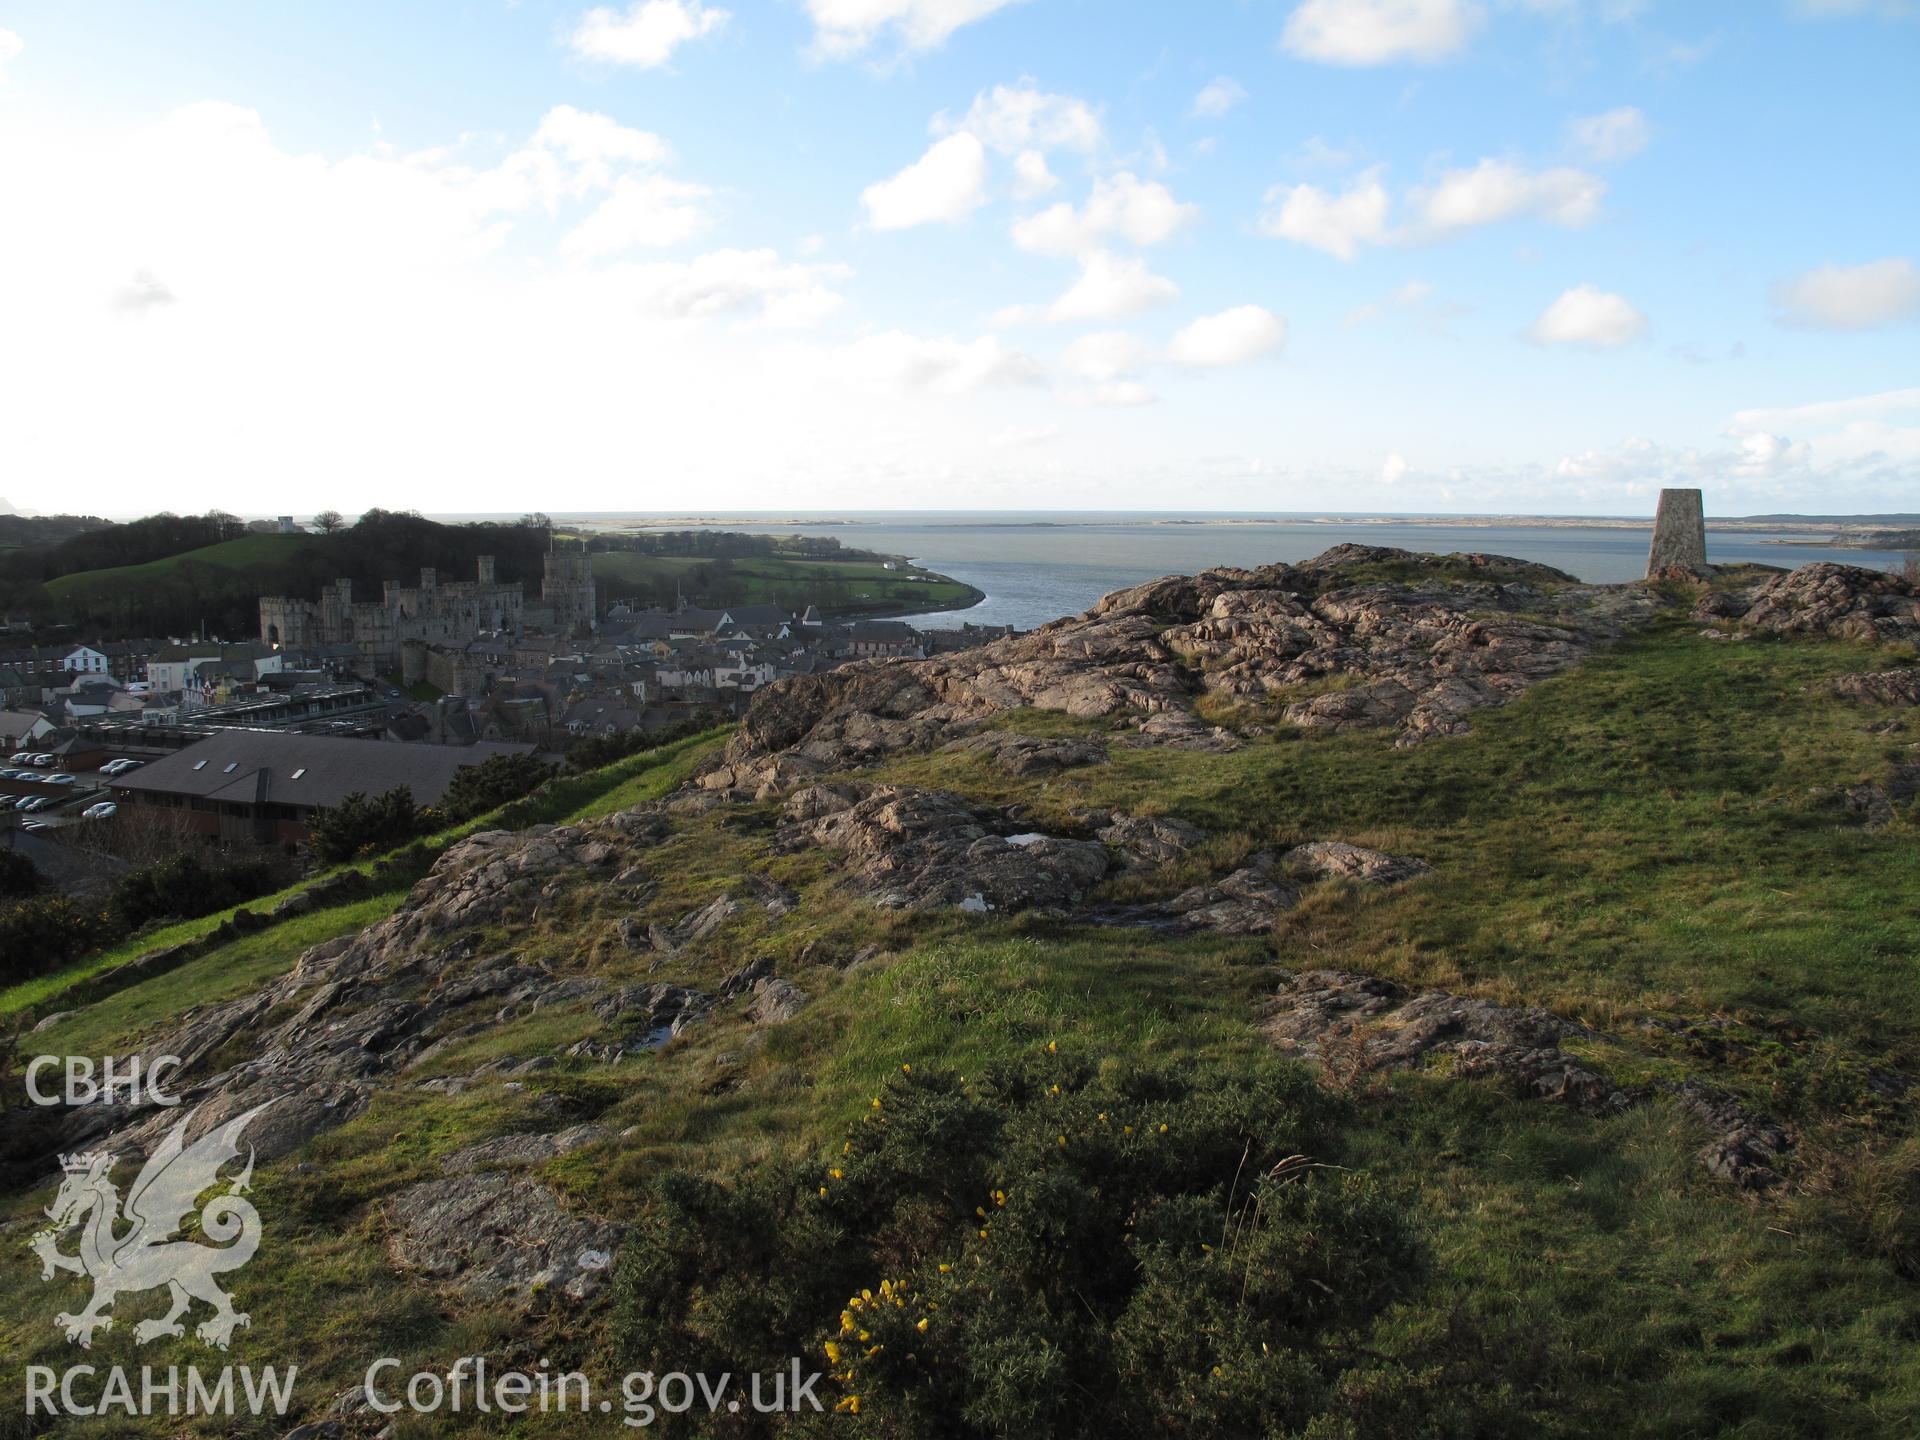 View of Twthill and Caernarfon Castle from the northeast, taken by Brian Malaws on 21 December 2009.